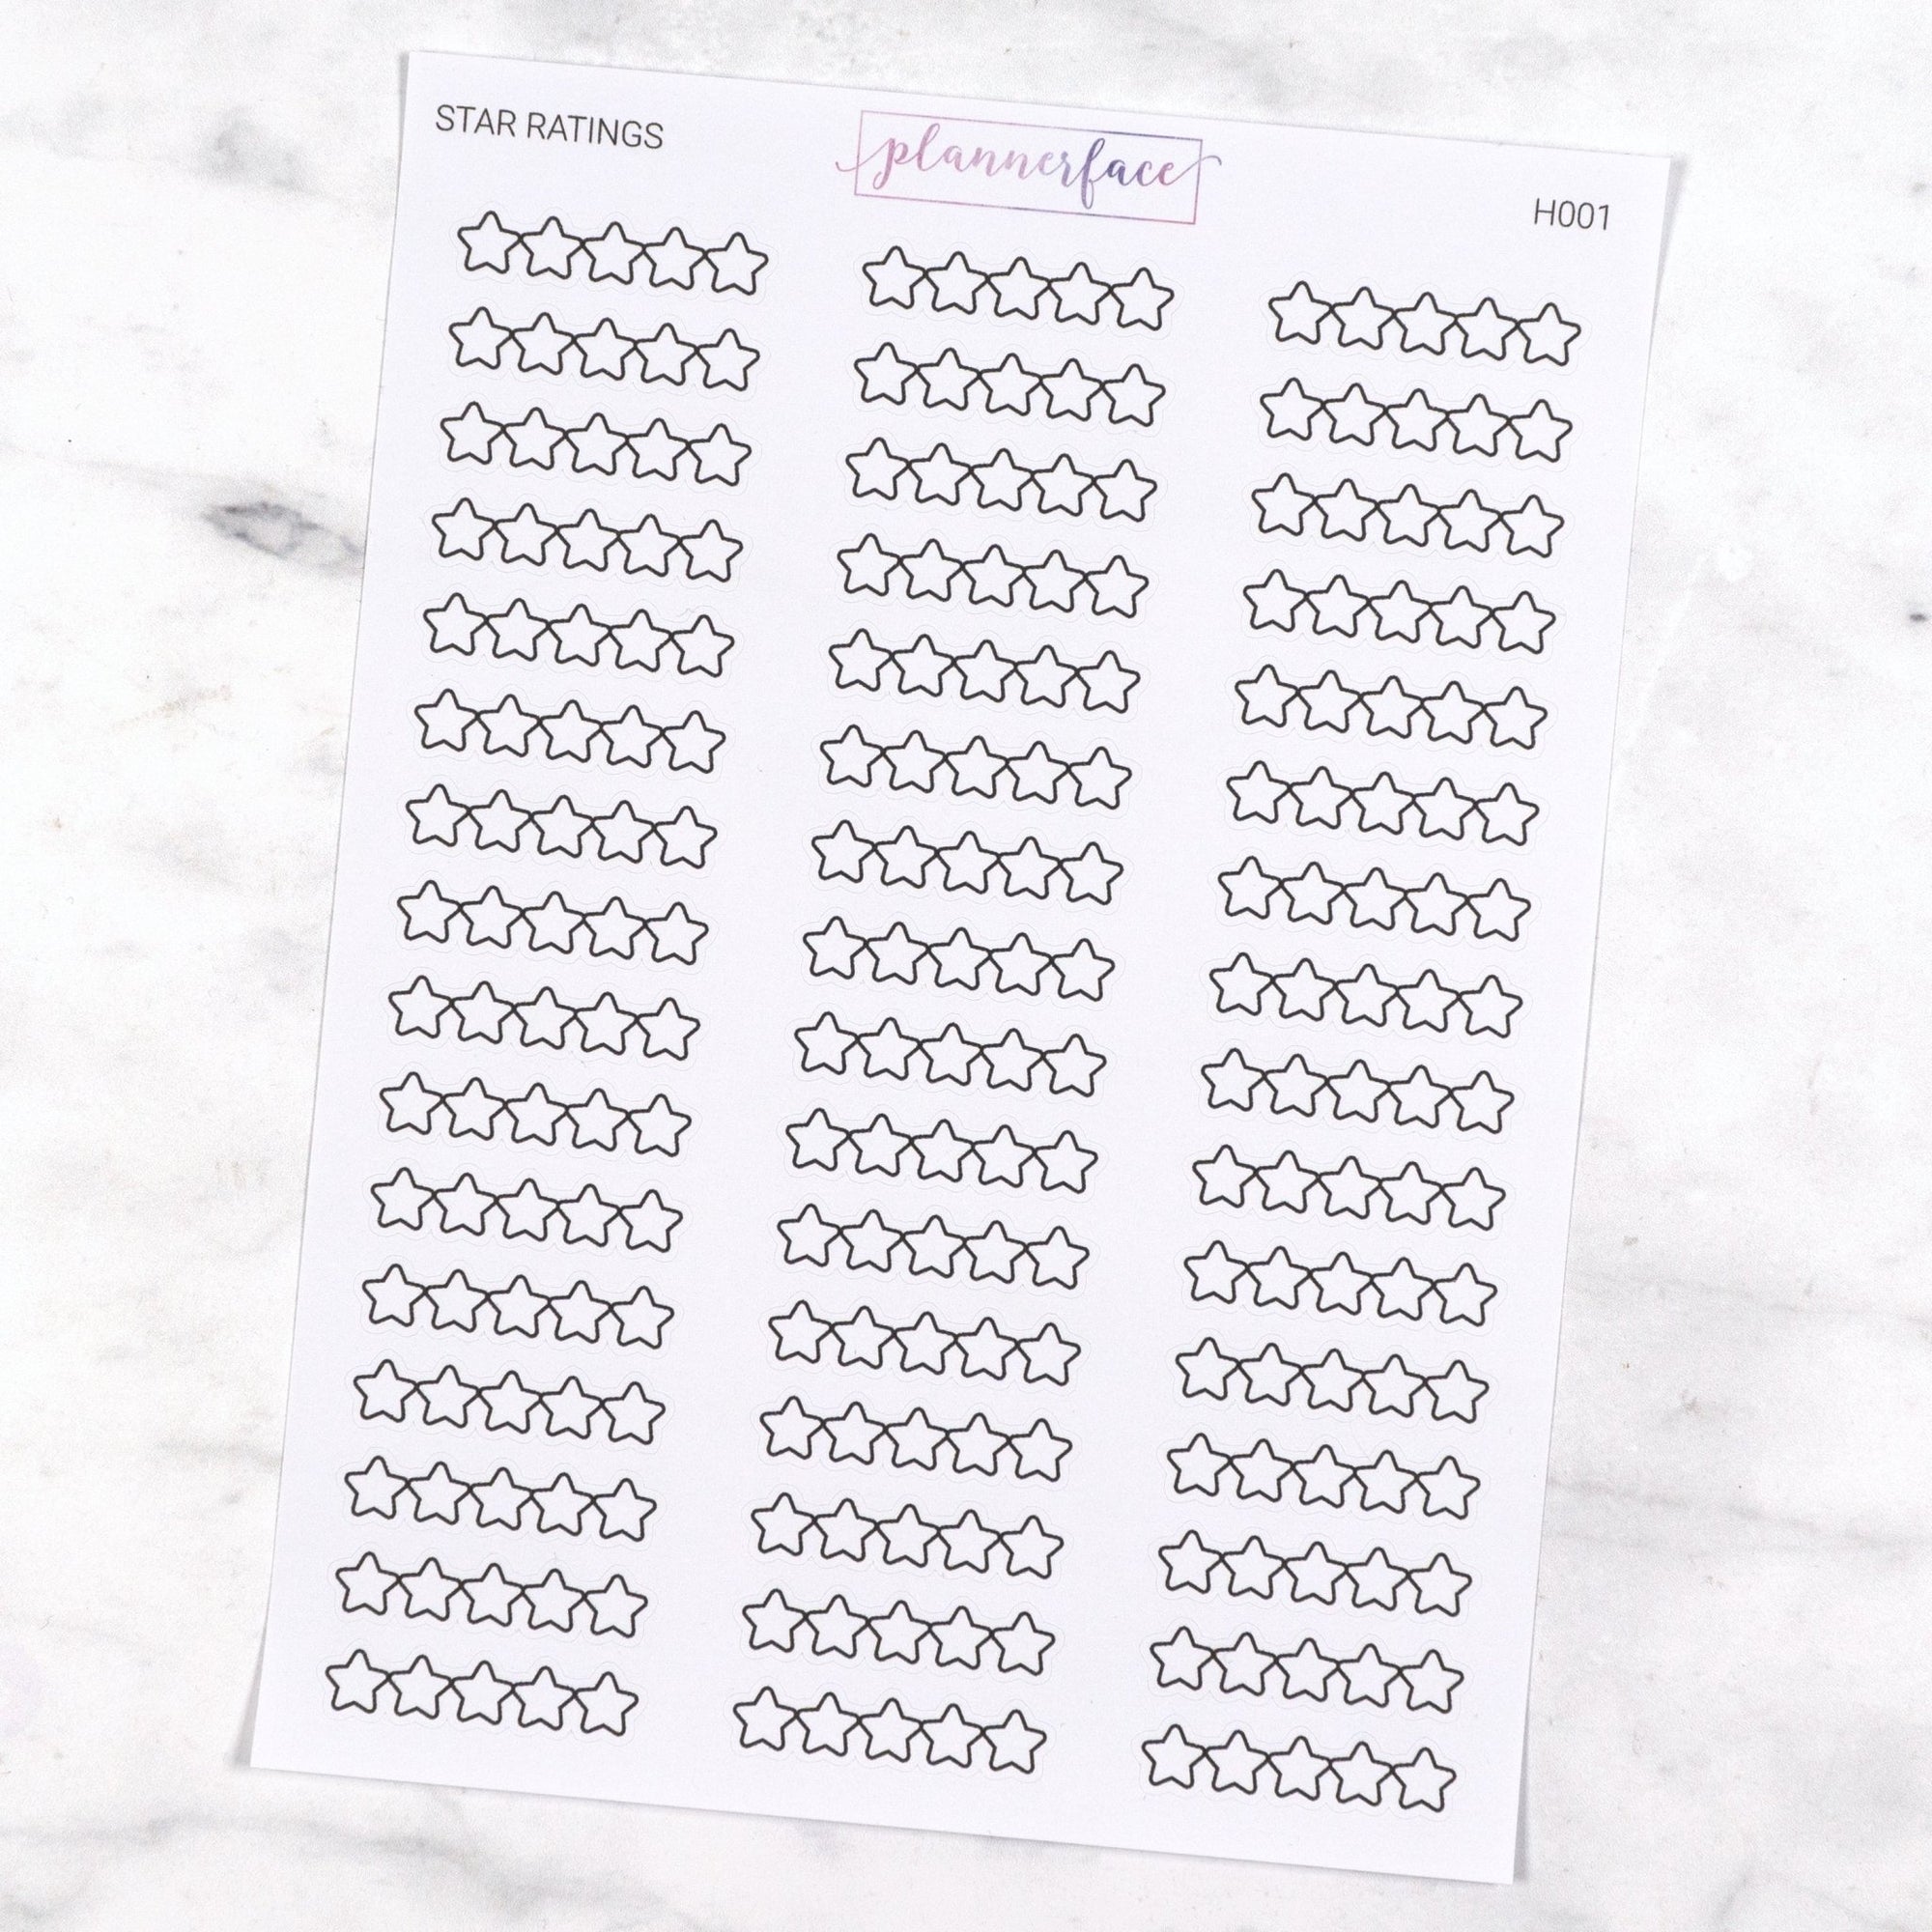 Star Rating Stickers by Plannerface